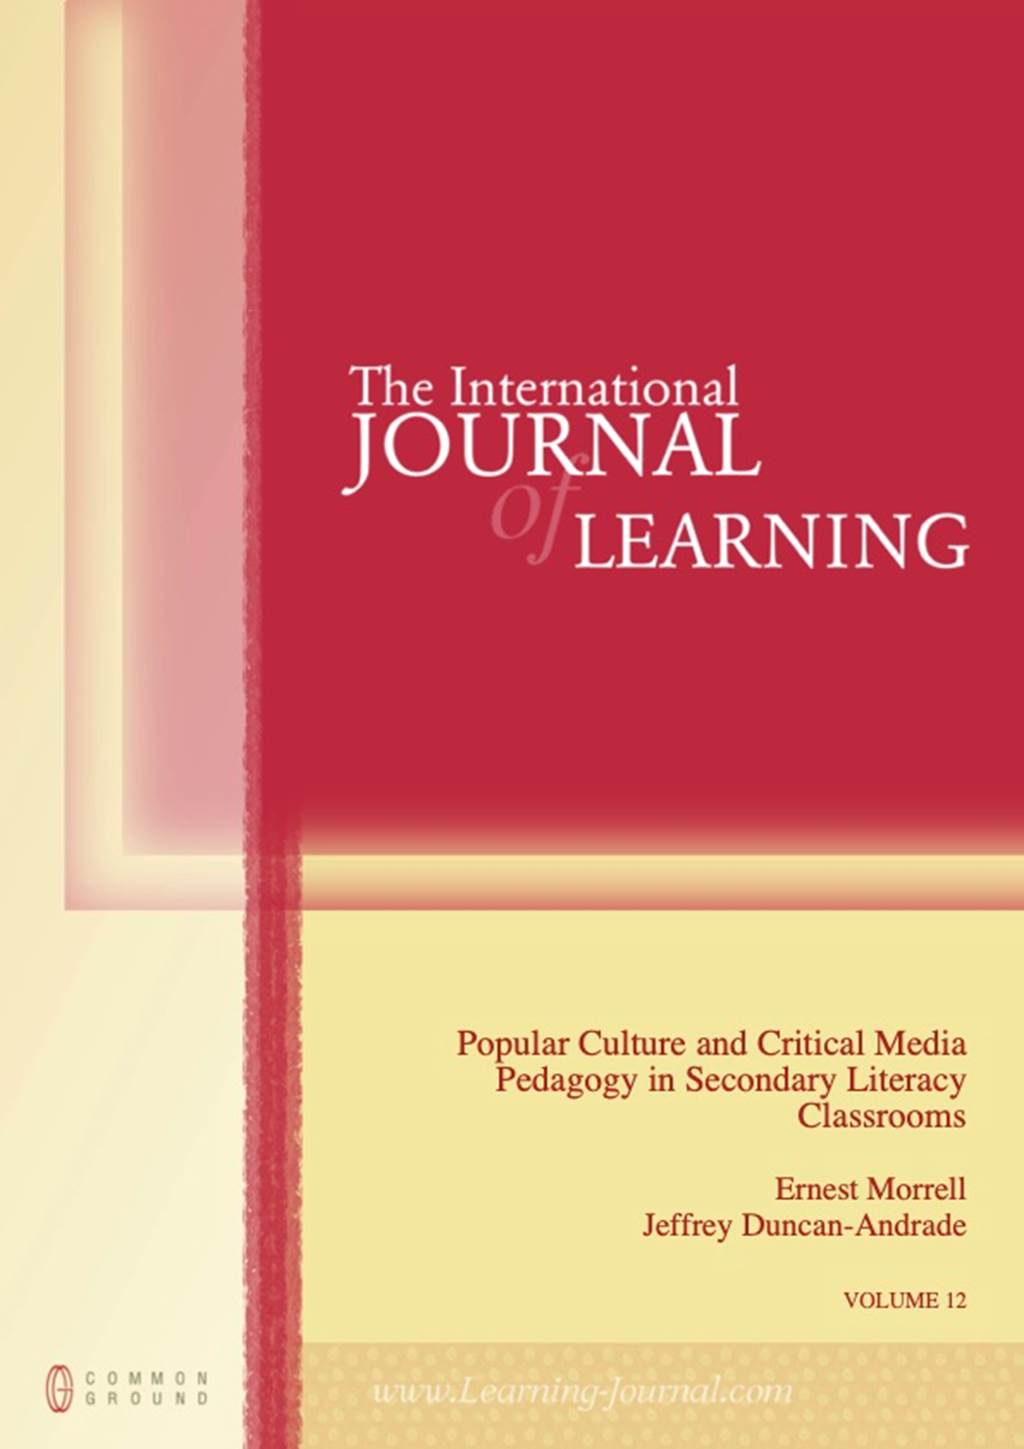 Popular Culture and Critical Media Pedagogy in Secondary Literacy Classrooms Image